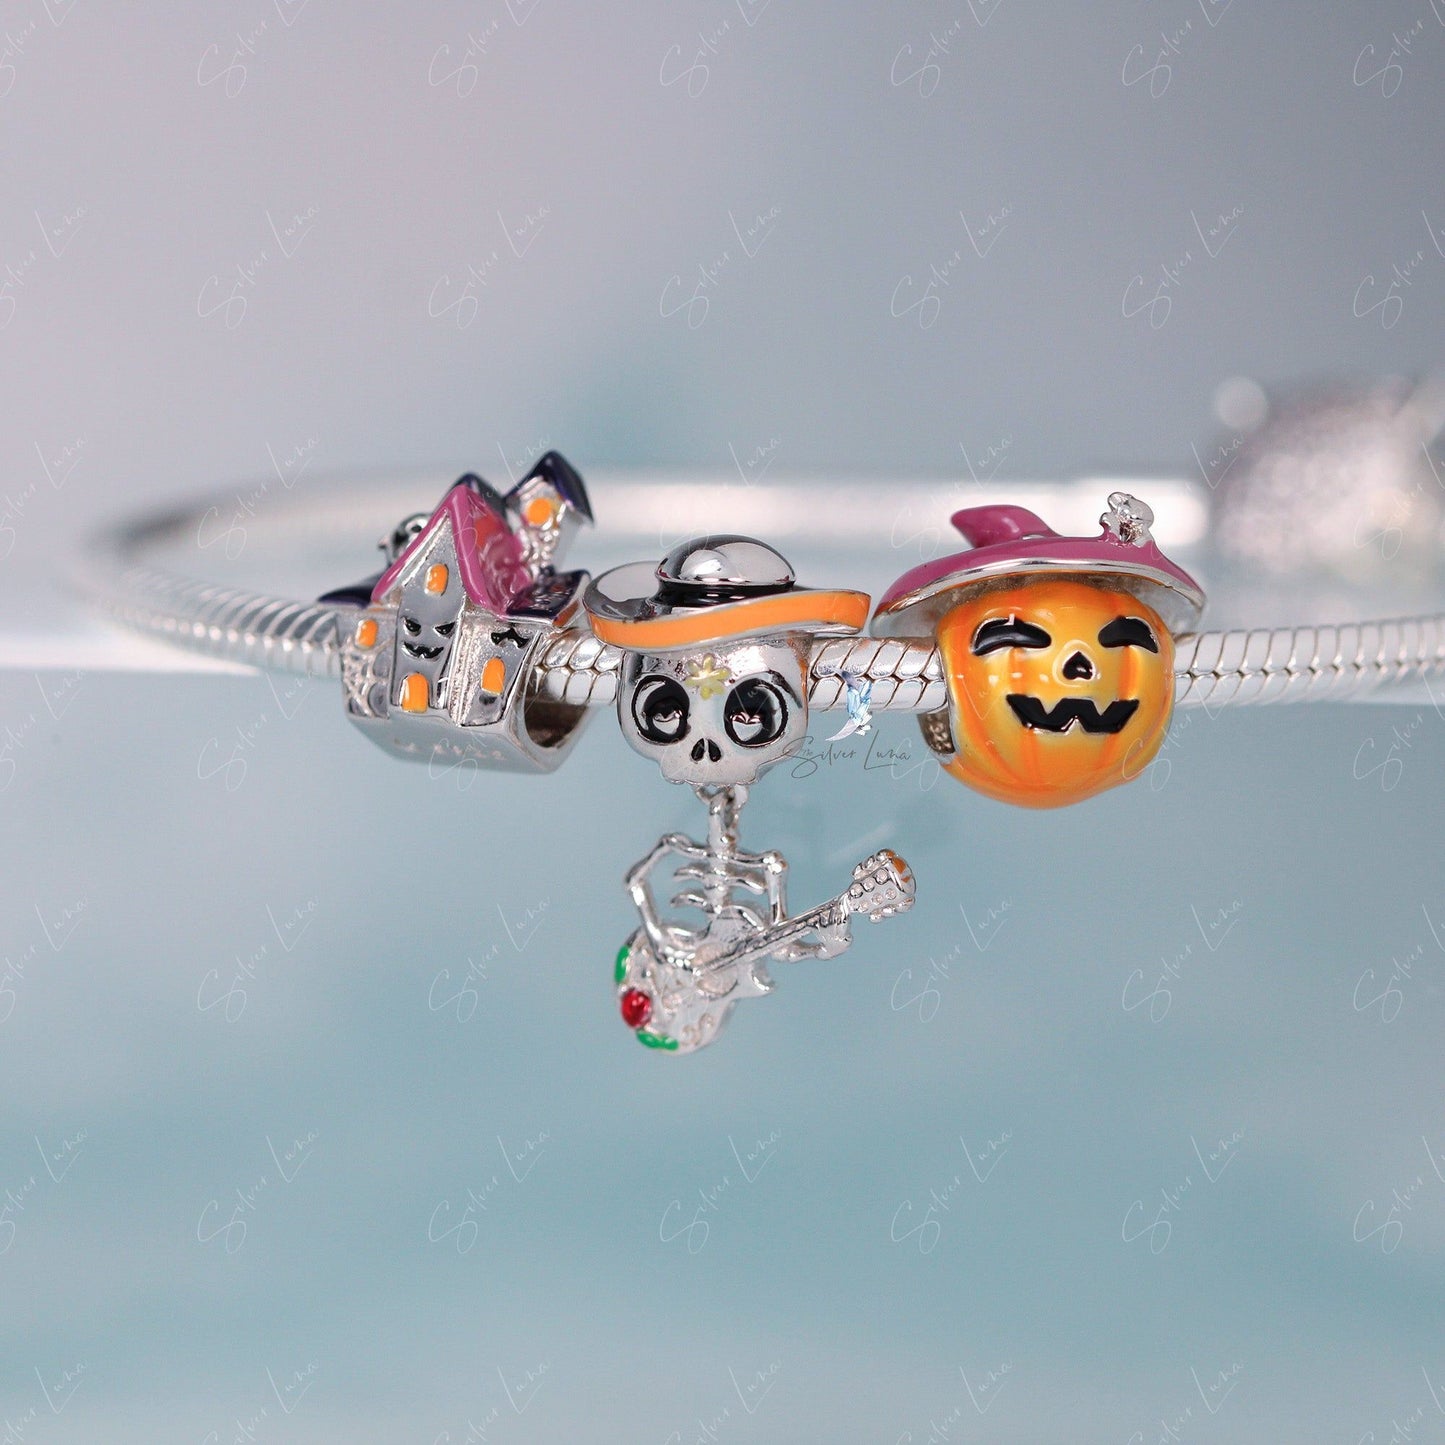 The ghost guitarist dangle charm